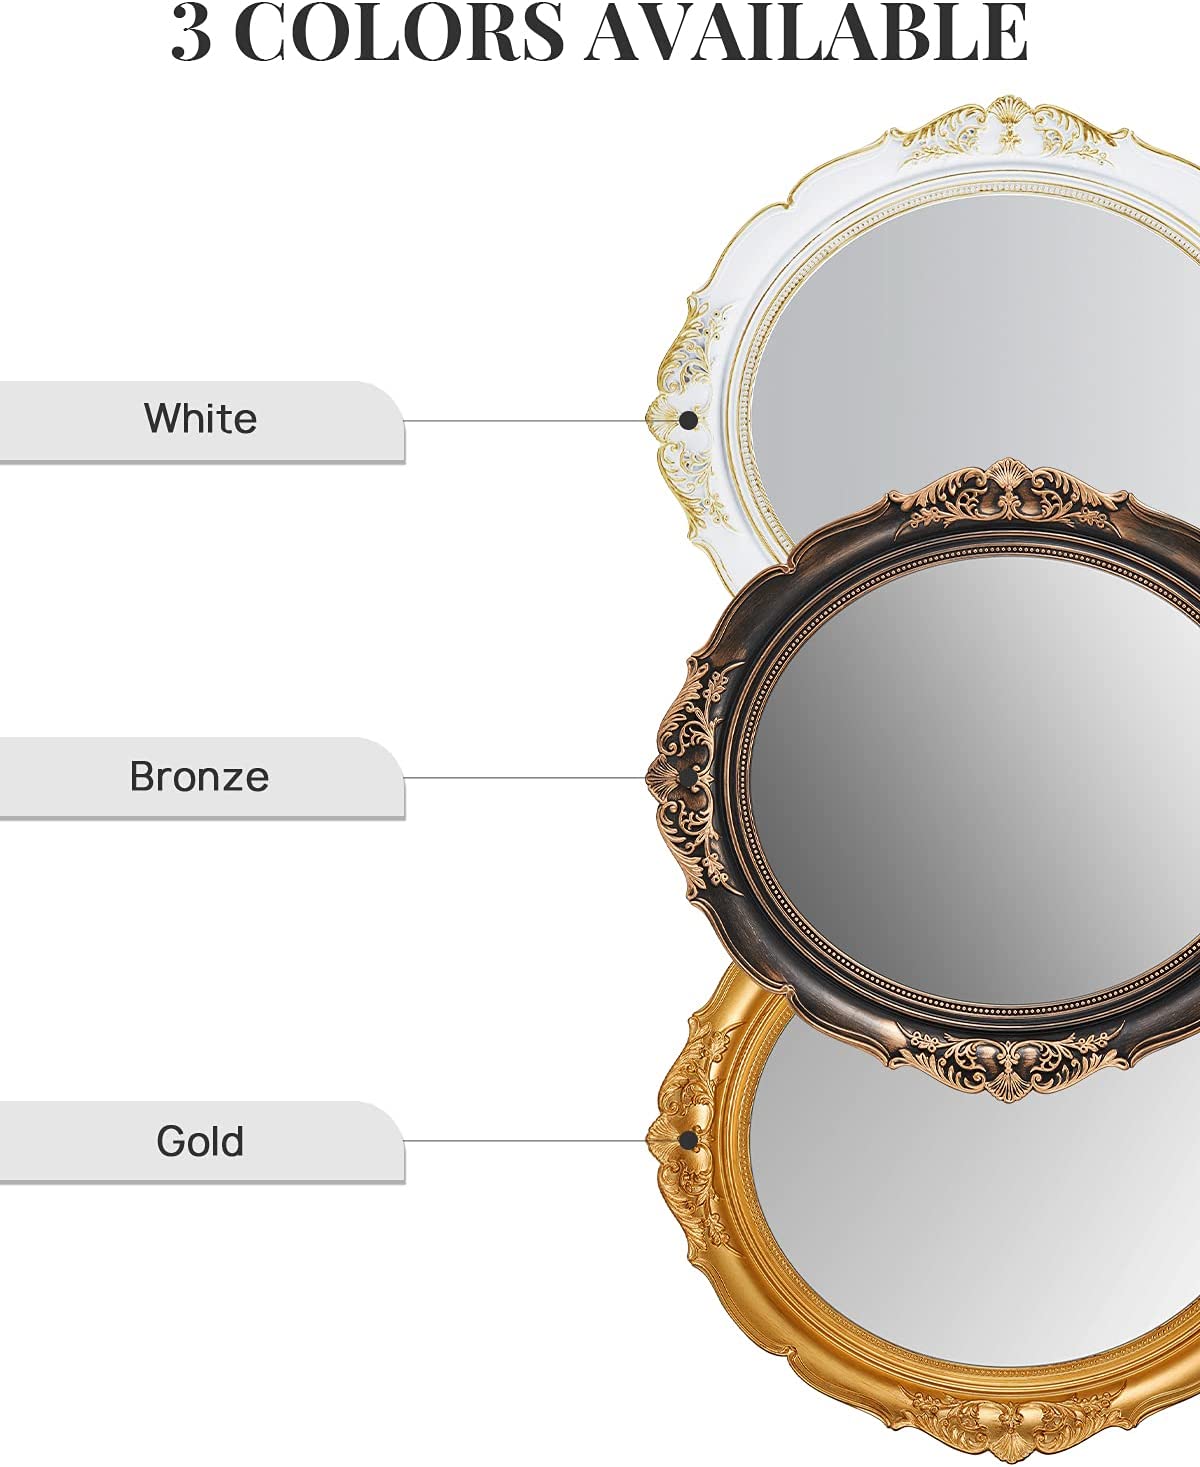 OMIRO Decorative Wall Mirror, Vintage Hanging Mirrors for Bedroom Living-Room Dresser Decor, Oval Antique White 13" W x 15" L, Pack of 2